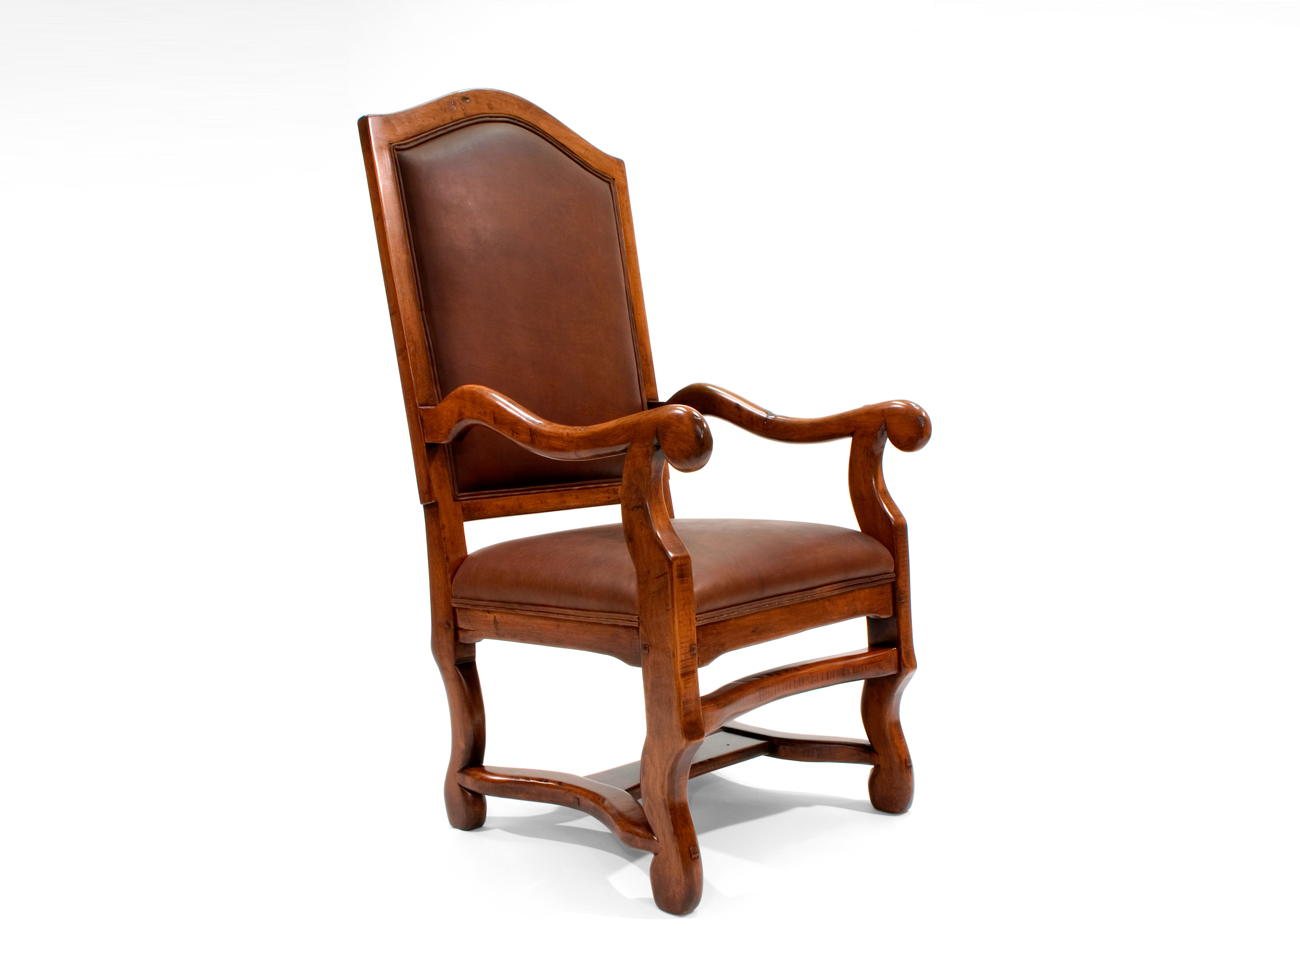 Robert-Seliger-Languedoc-Leather-Chair-angle